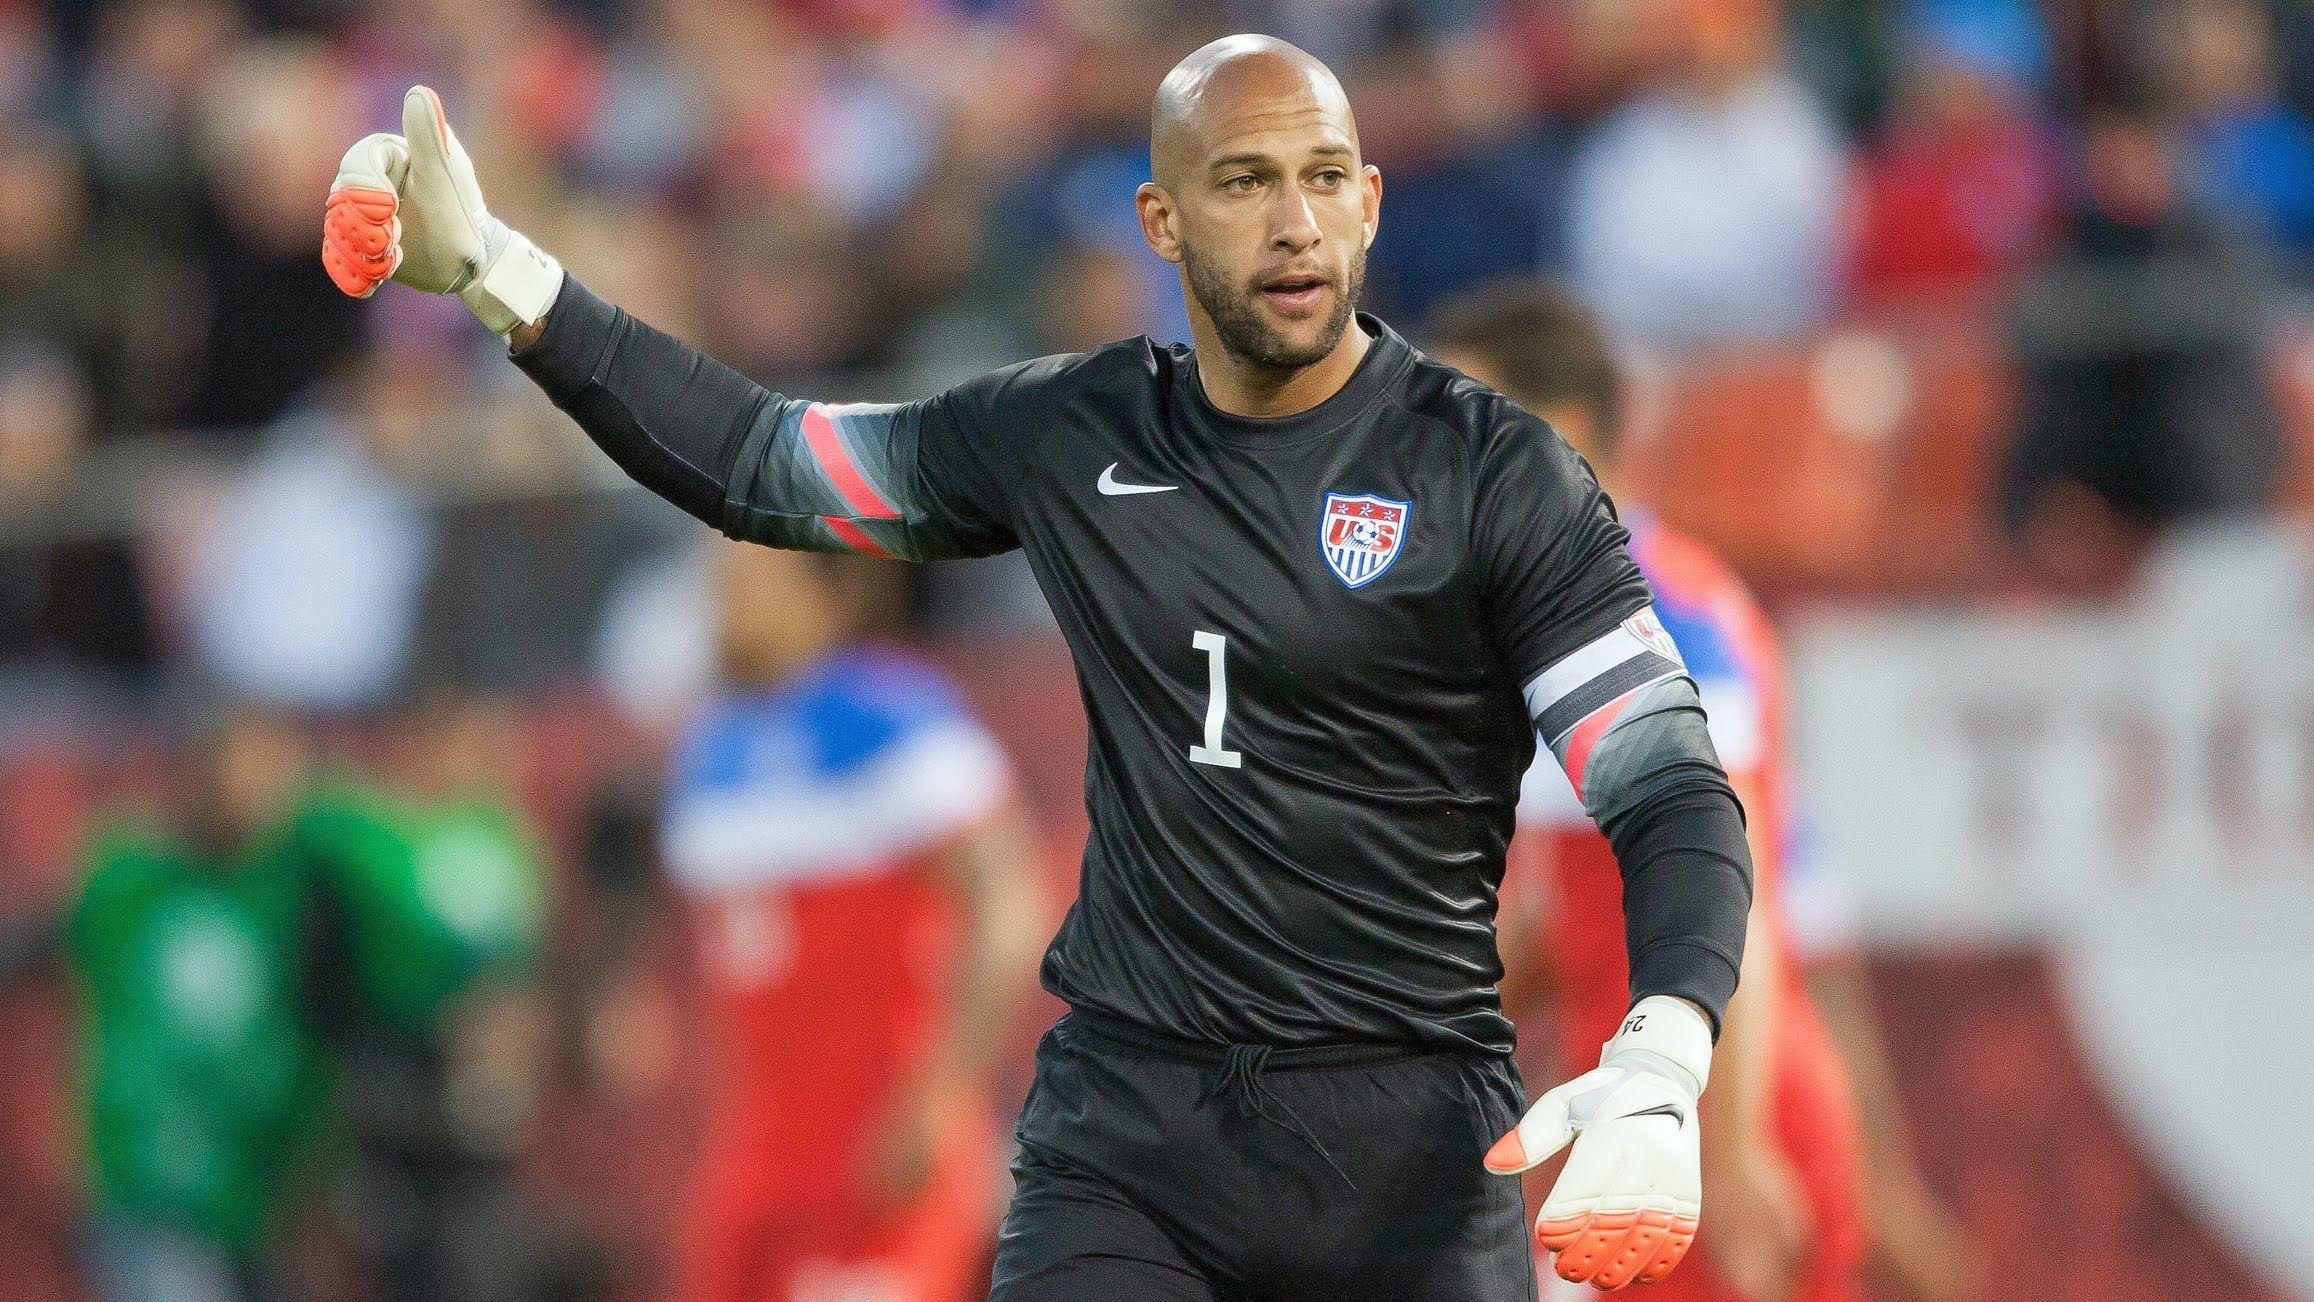 Find out: Tim Howard World Cup 2014 wallpaper